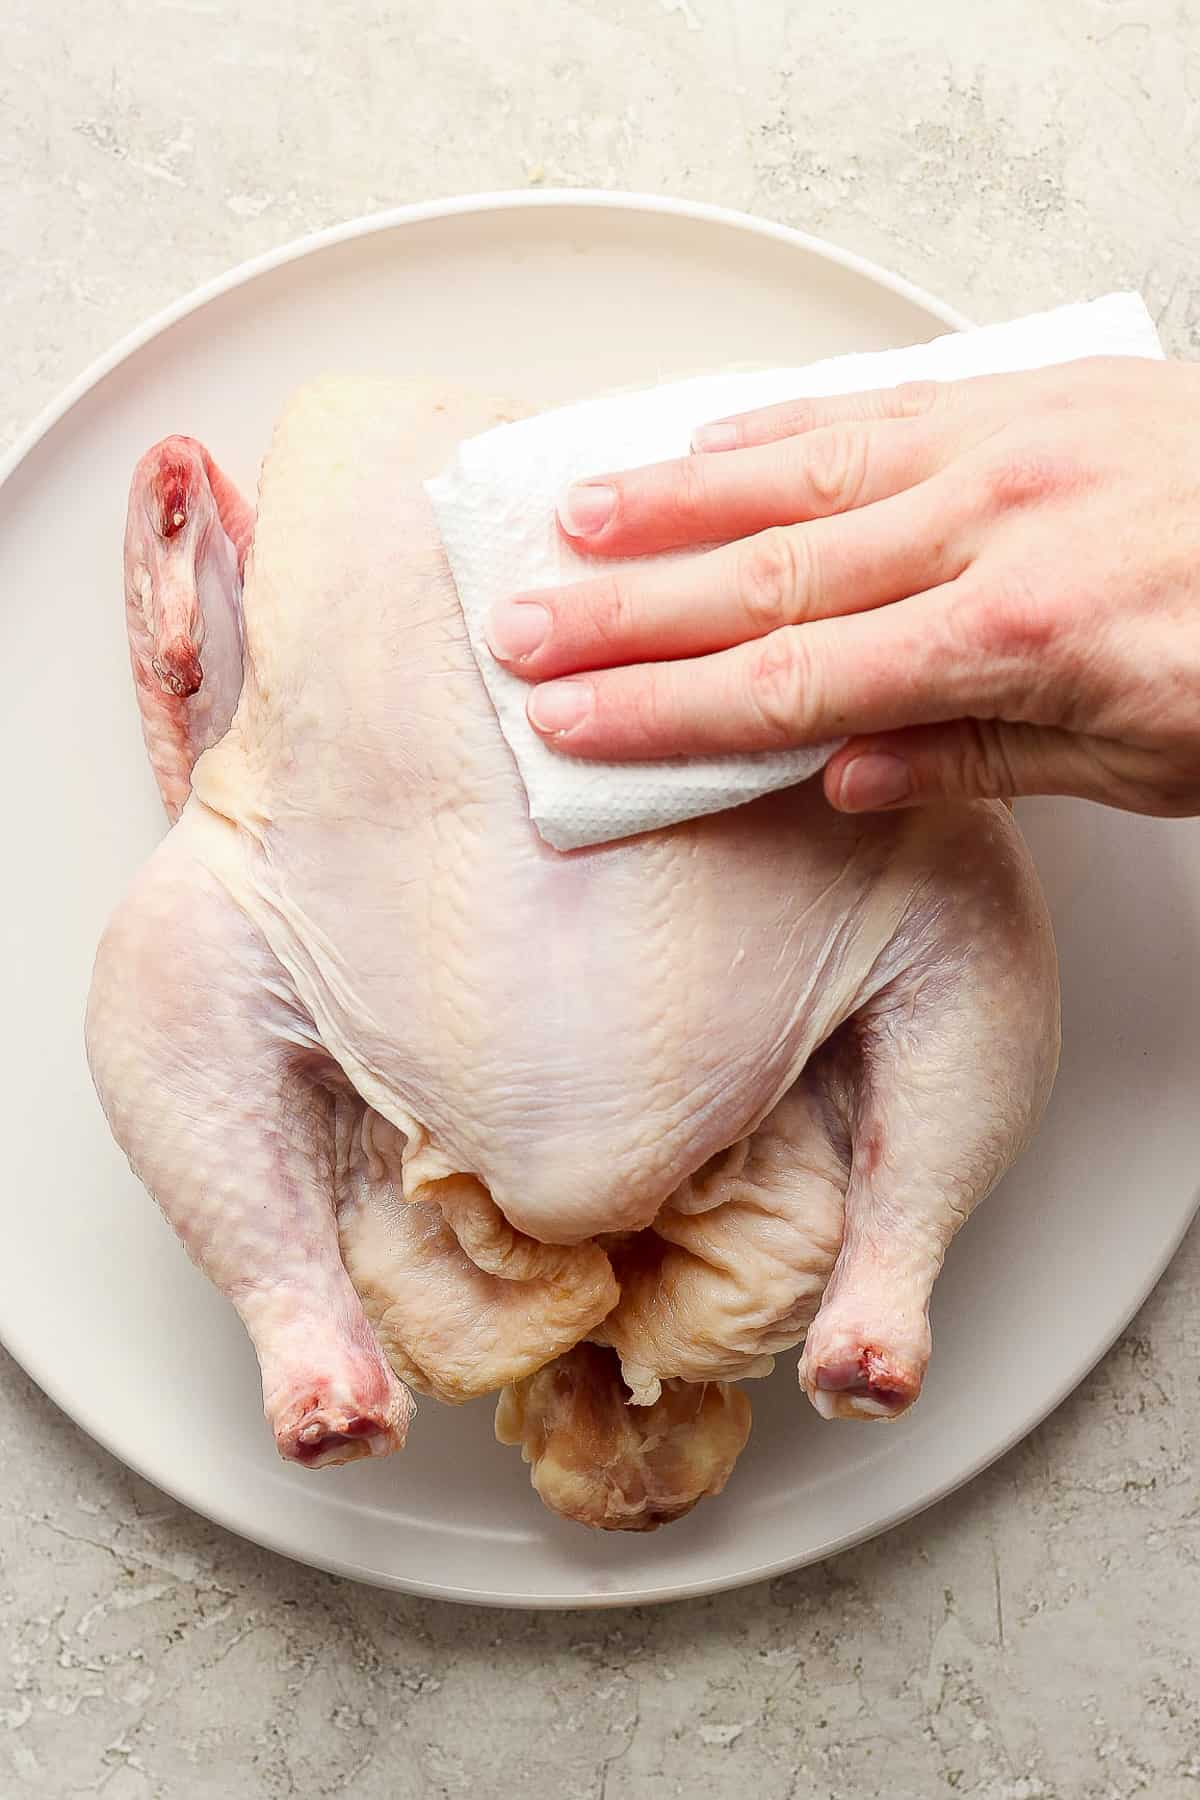 A raw whole chicken being patted dry with a paper towel.